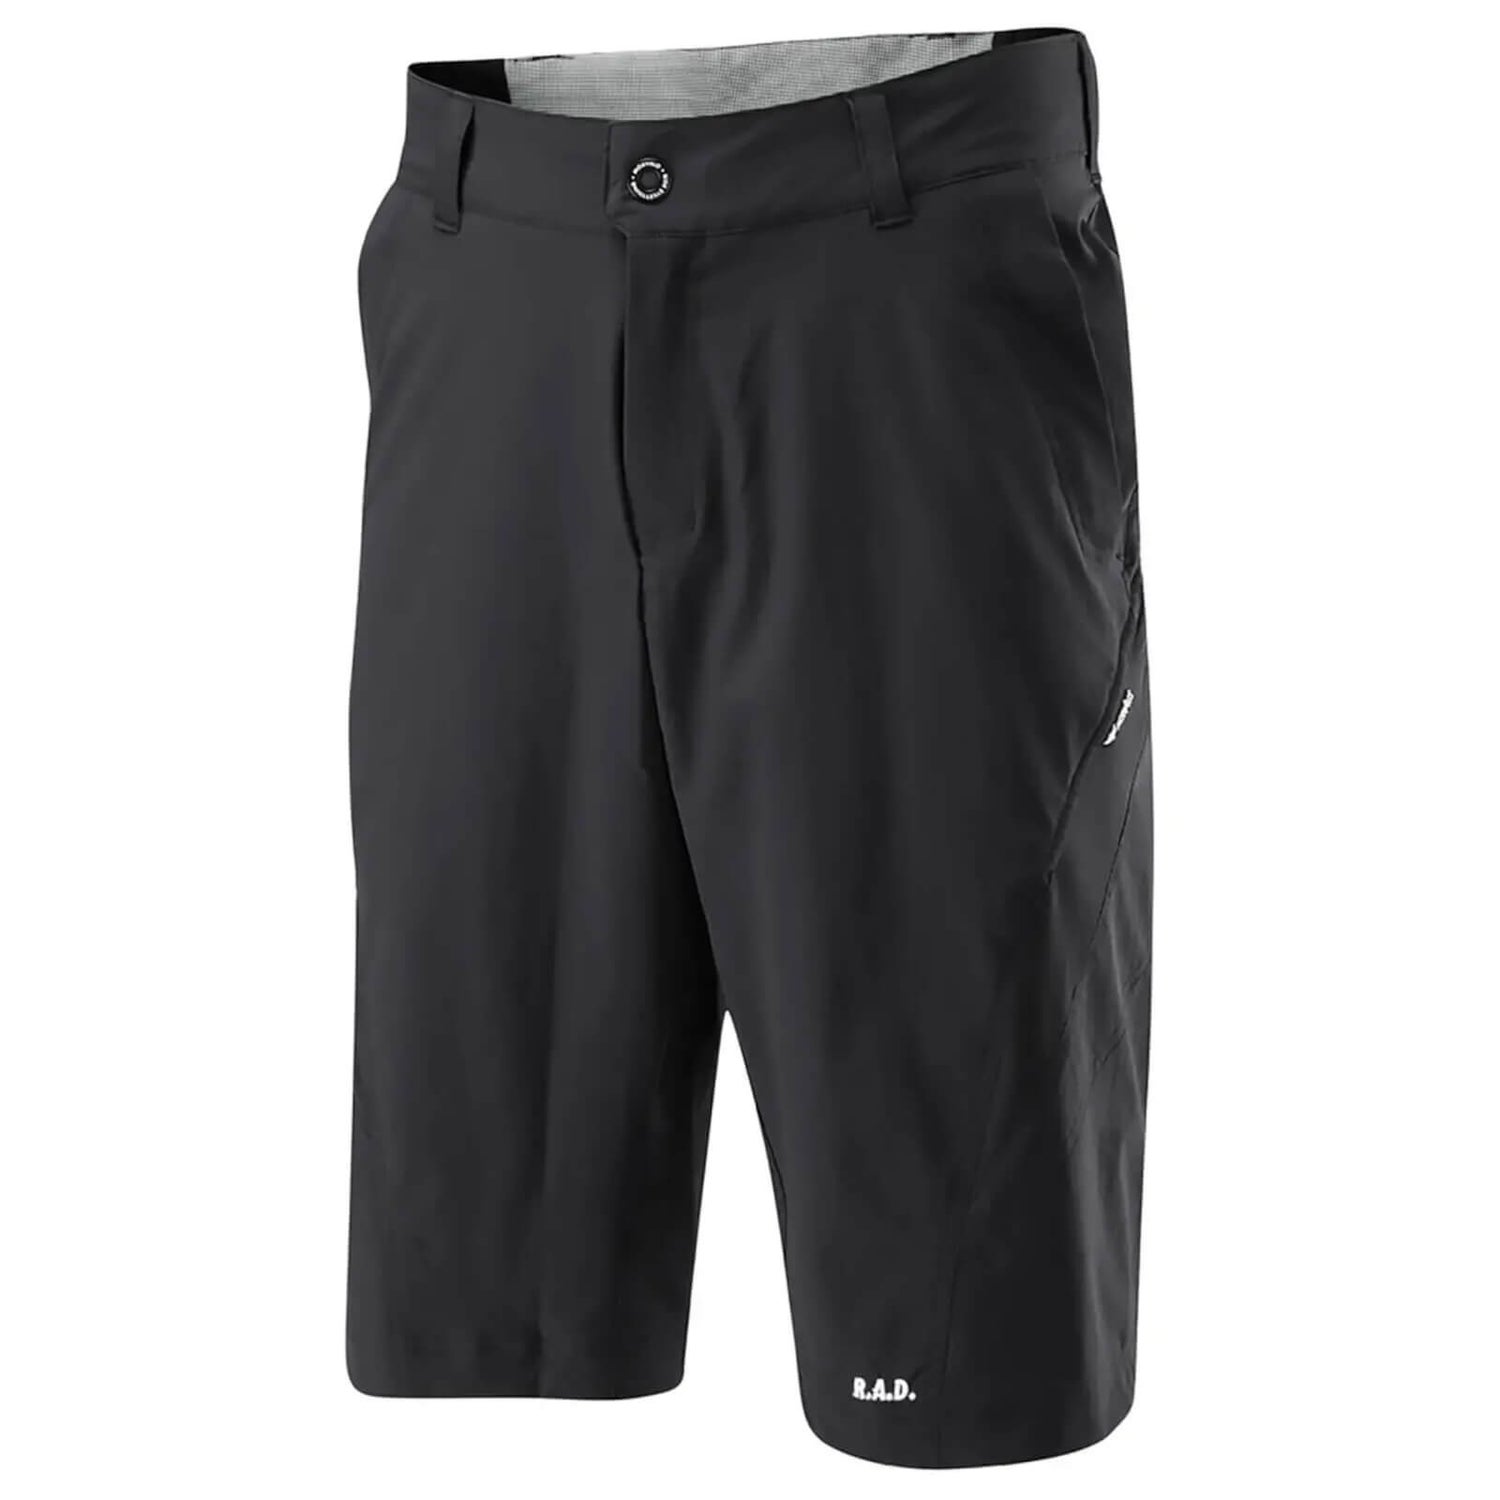 Rise and Descend MTB Shorts